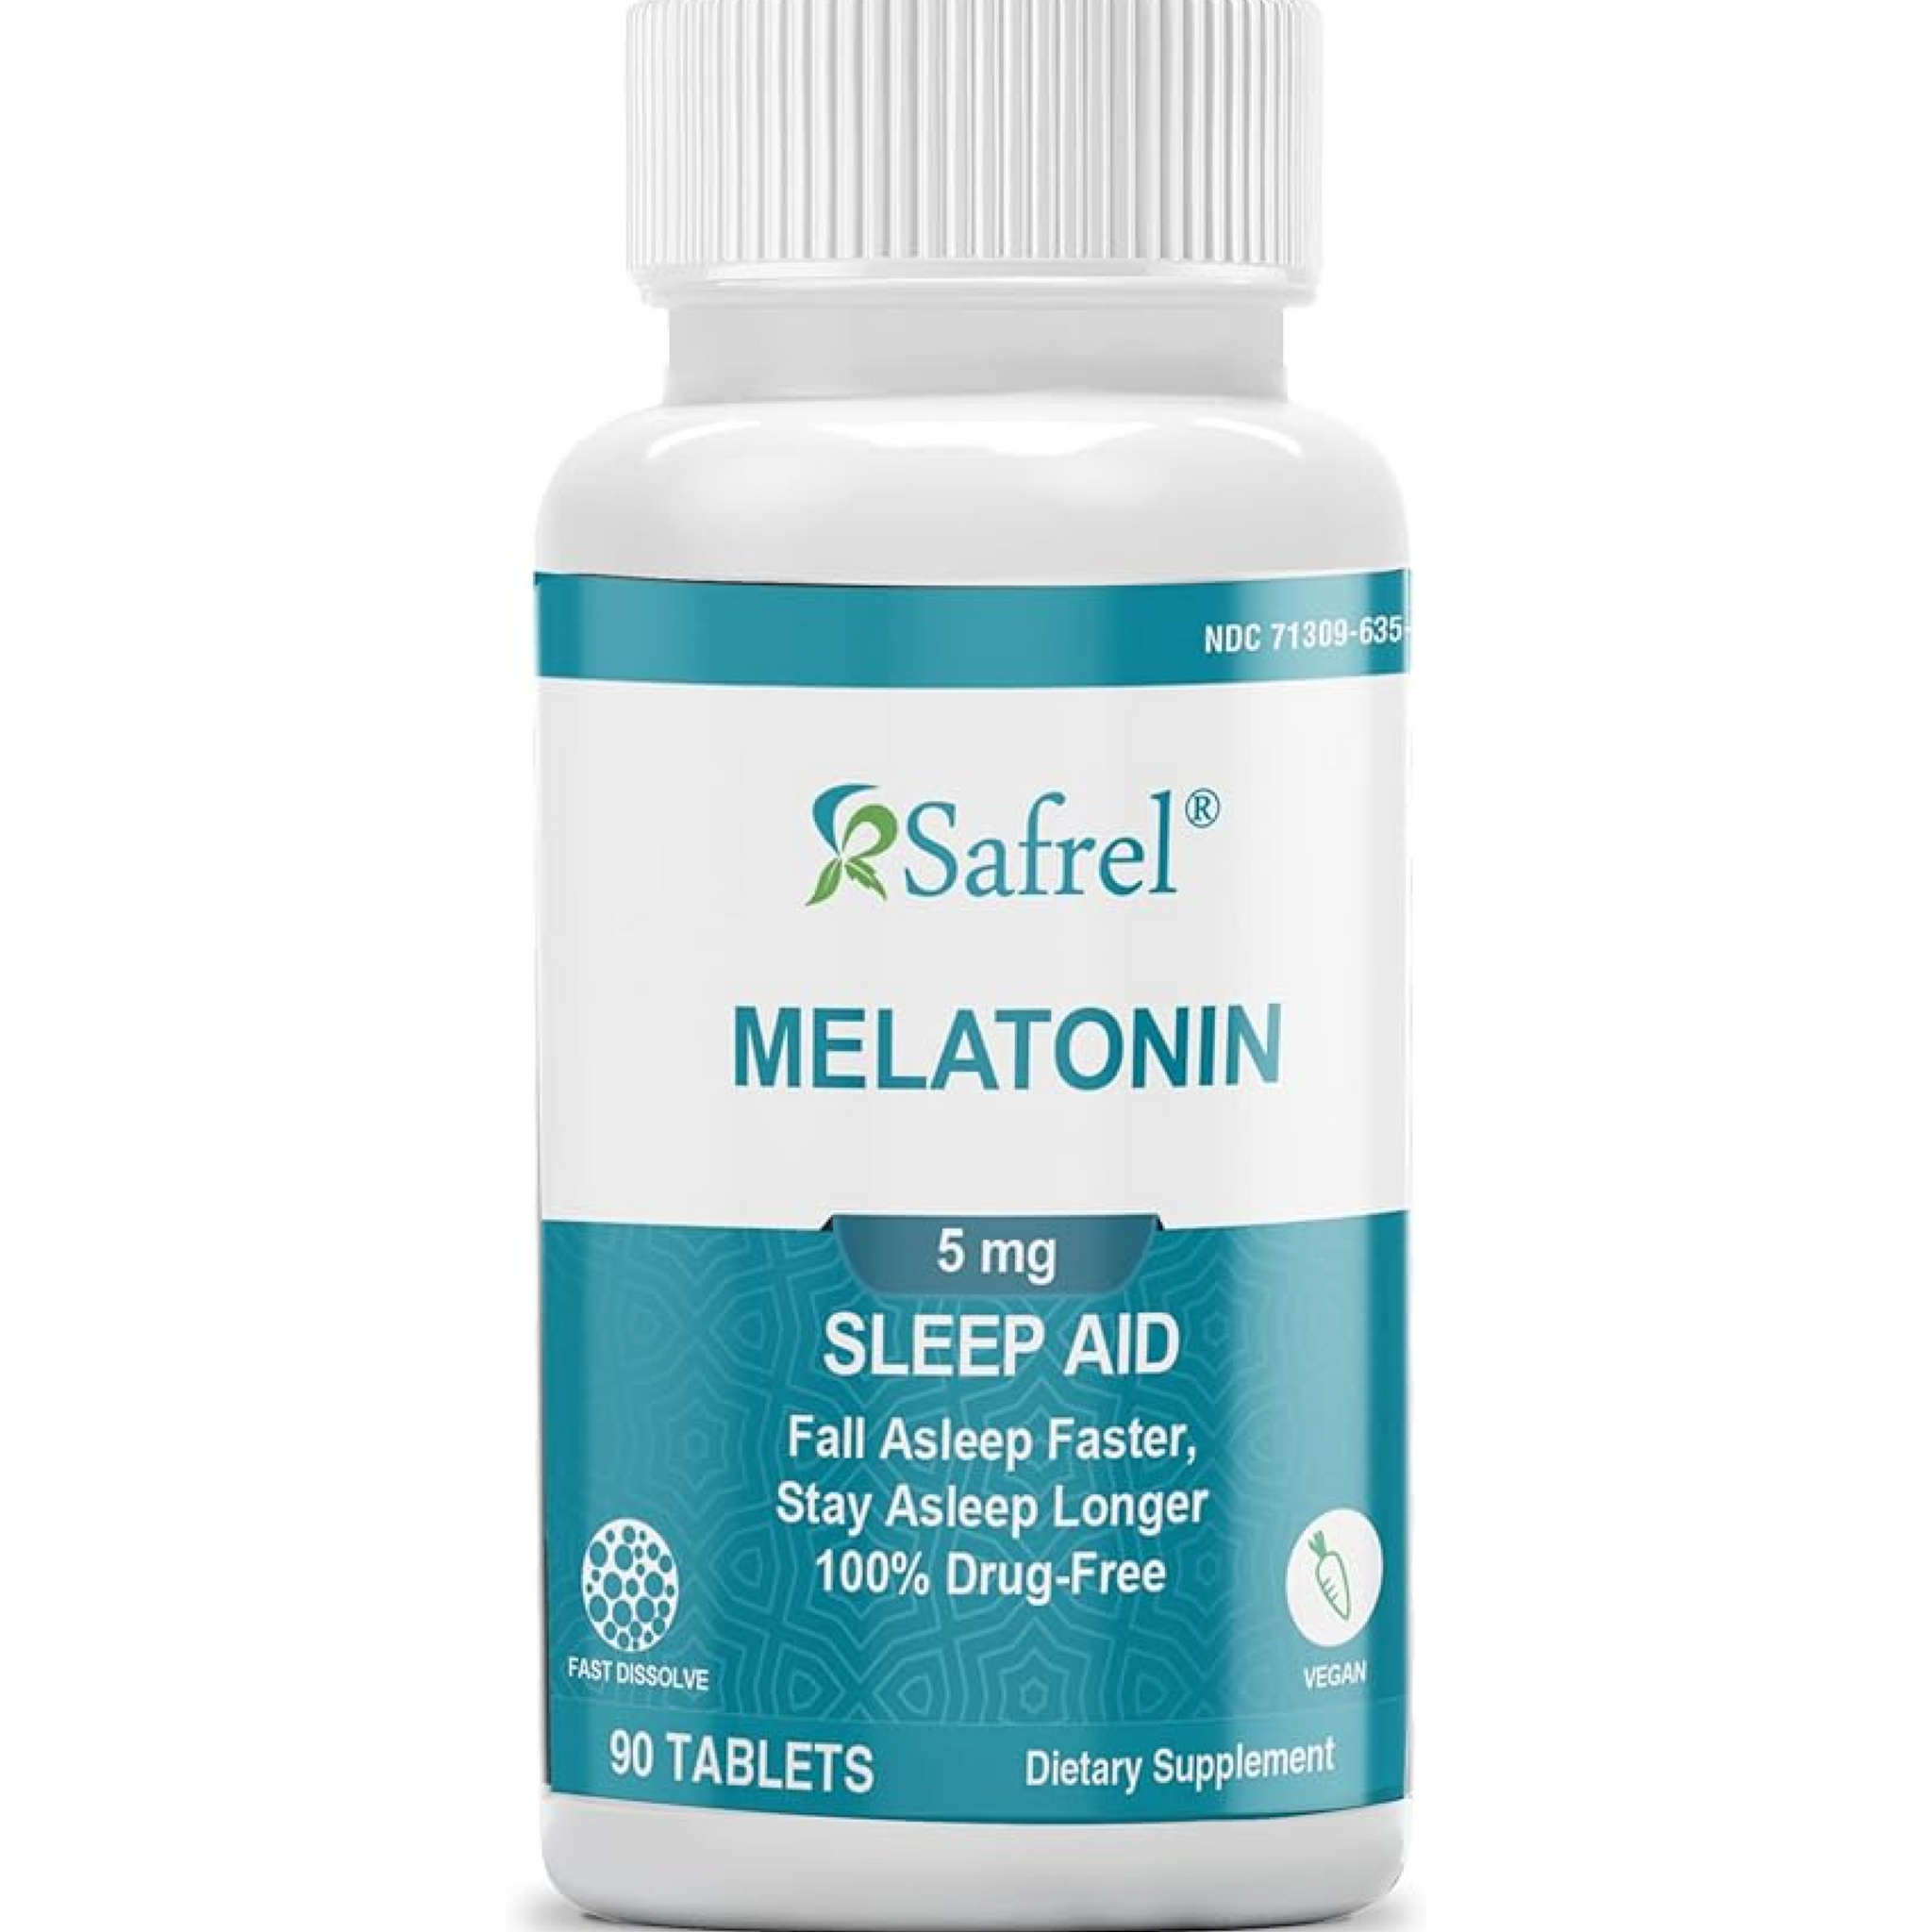 Safrel Melatonin 5mg Tablets, Vegan Natural Sleep Aid, Helps You to Fall Asleep Faster and Stay Asleep Longer, Helps with Occasional Sleeplessness and Supports Restful Sleep, 90 Count